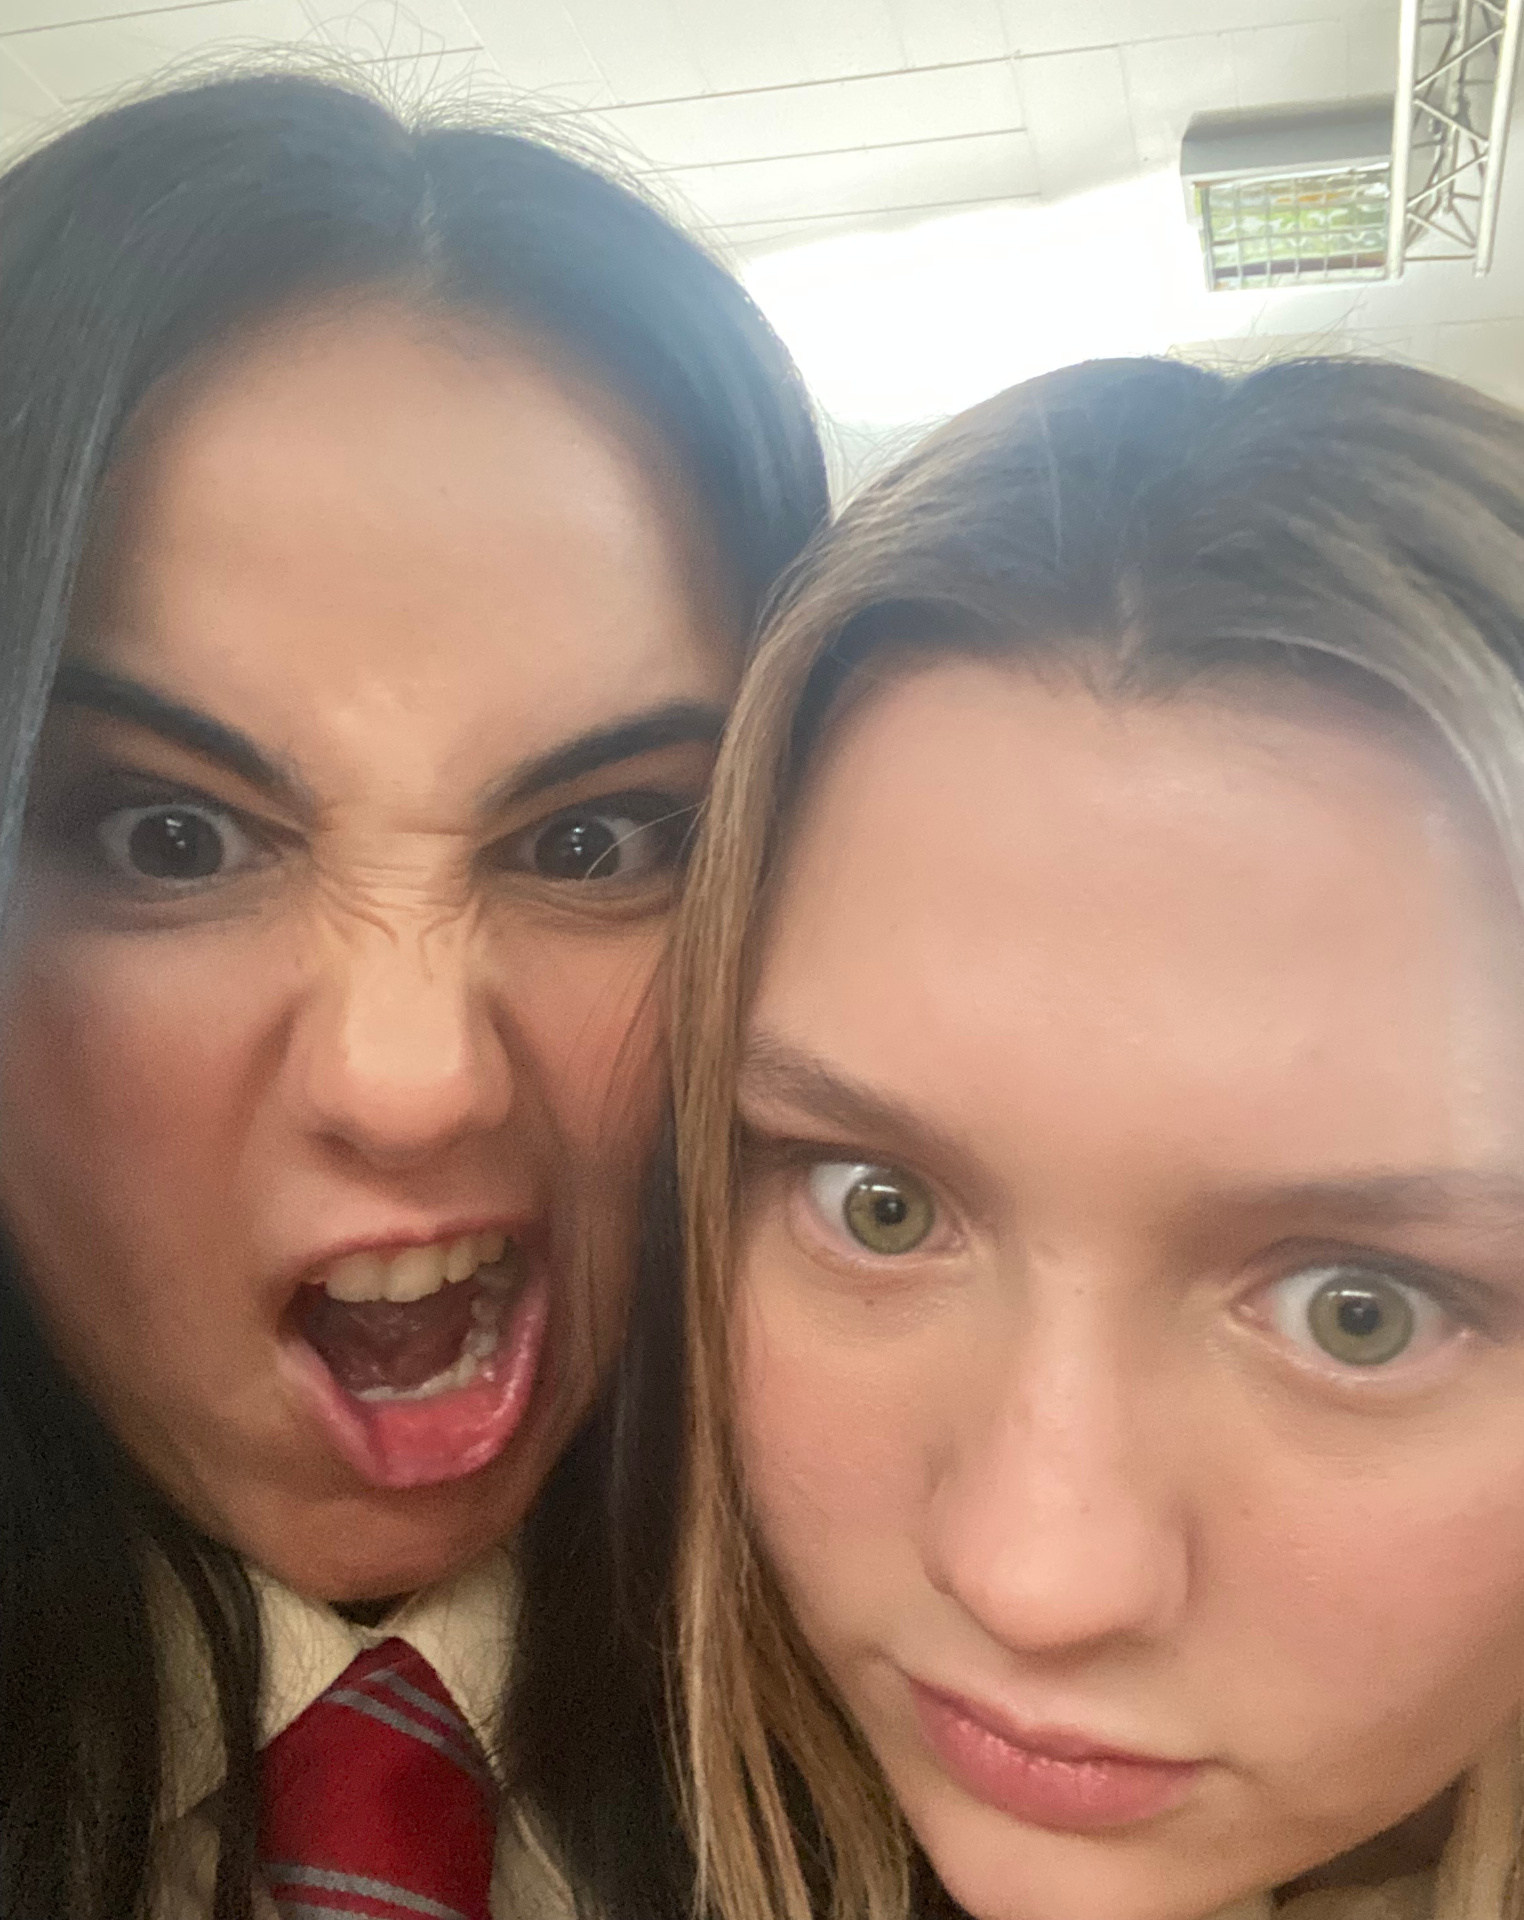 Leila and another female actor pulling faces